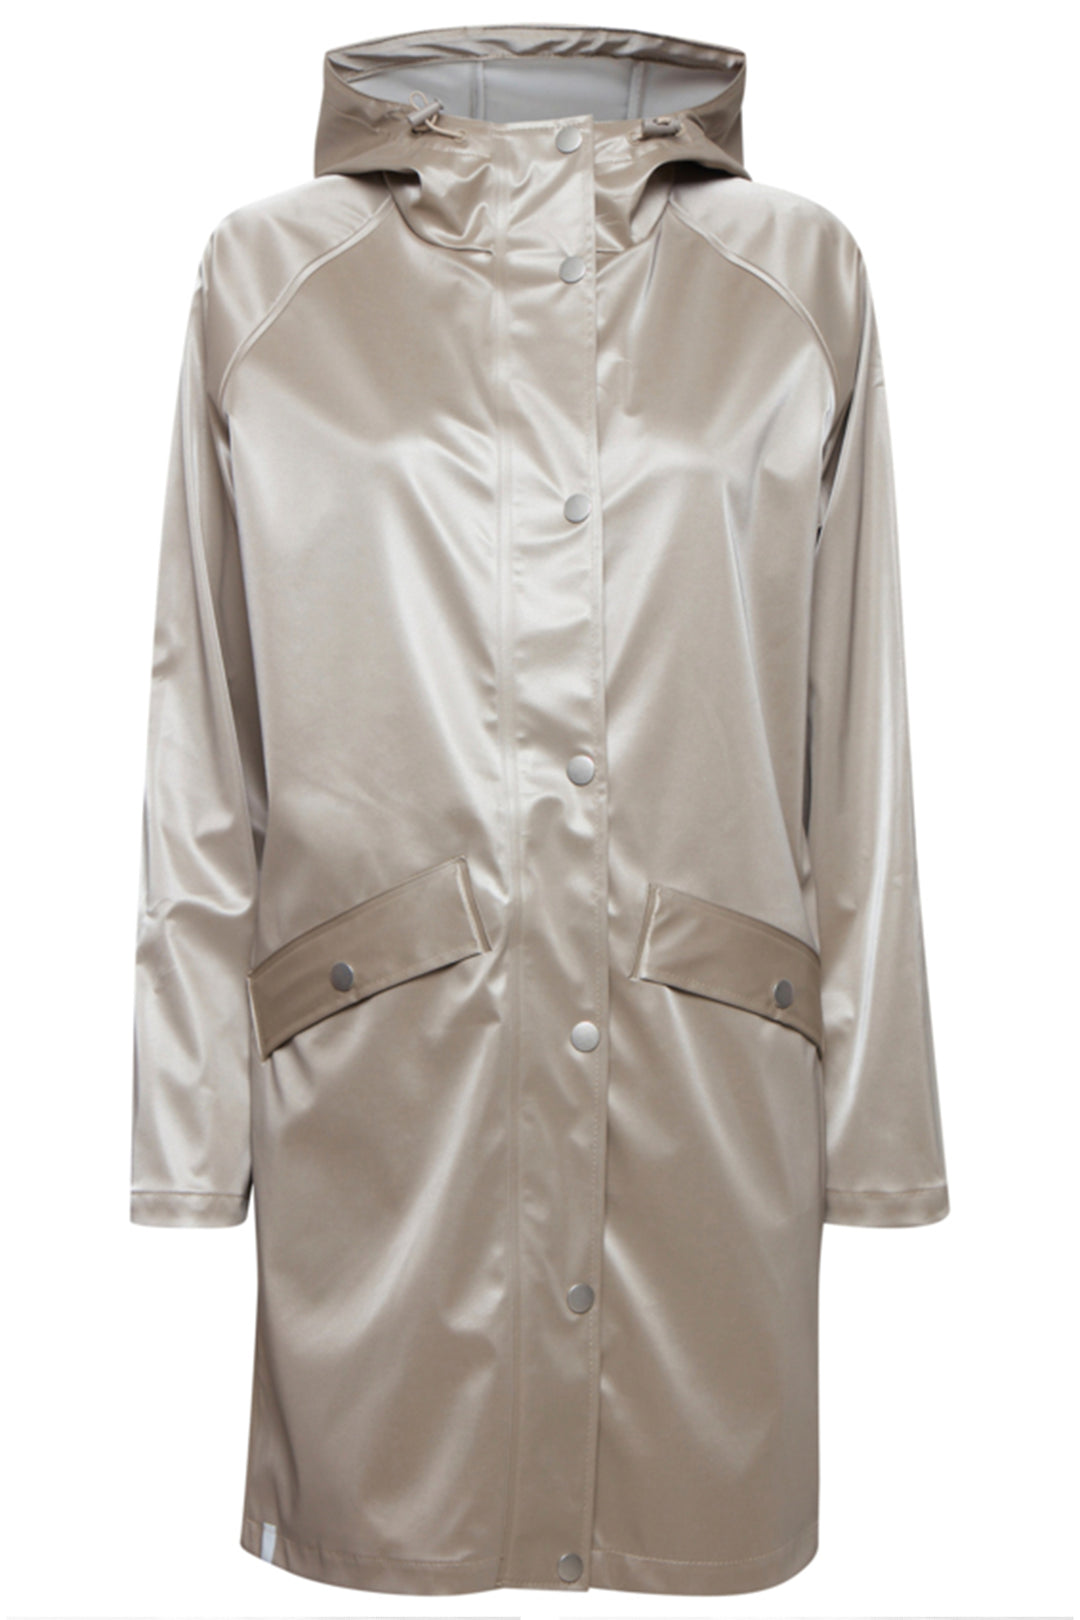 This Long Jacket features a spectacular shine and glossy finish that gives you an edgy, modern look.